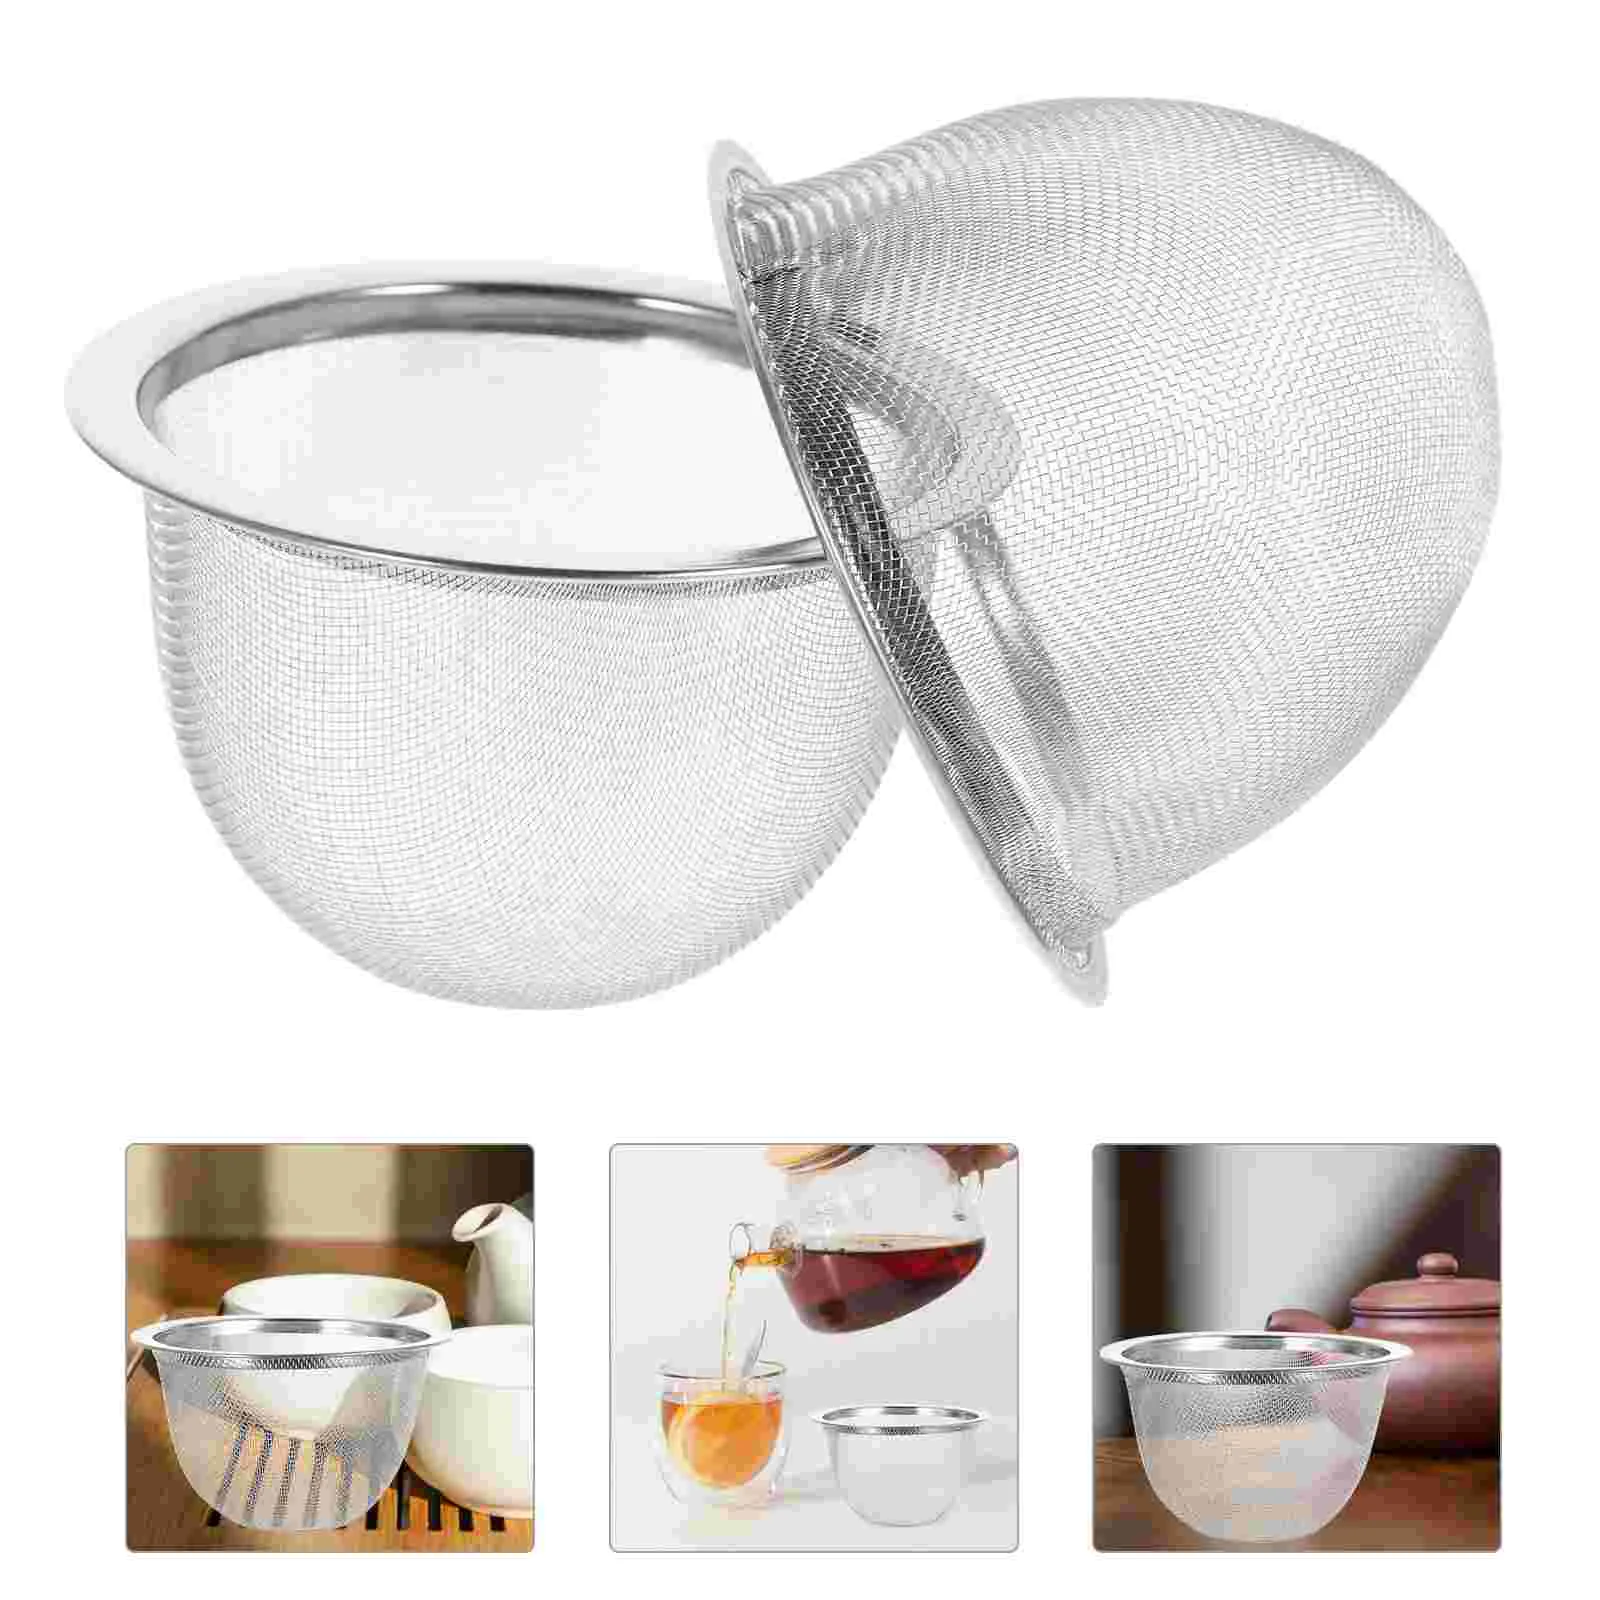 

Tea Strainer Infuser Mesh Loose Teapot Stainless Steel Filter Leaf Replacement Coffee Metal Steeper Ball Insert Pot Filters Fine